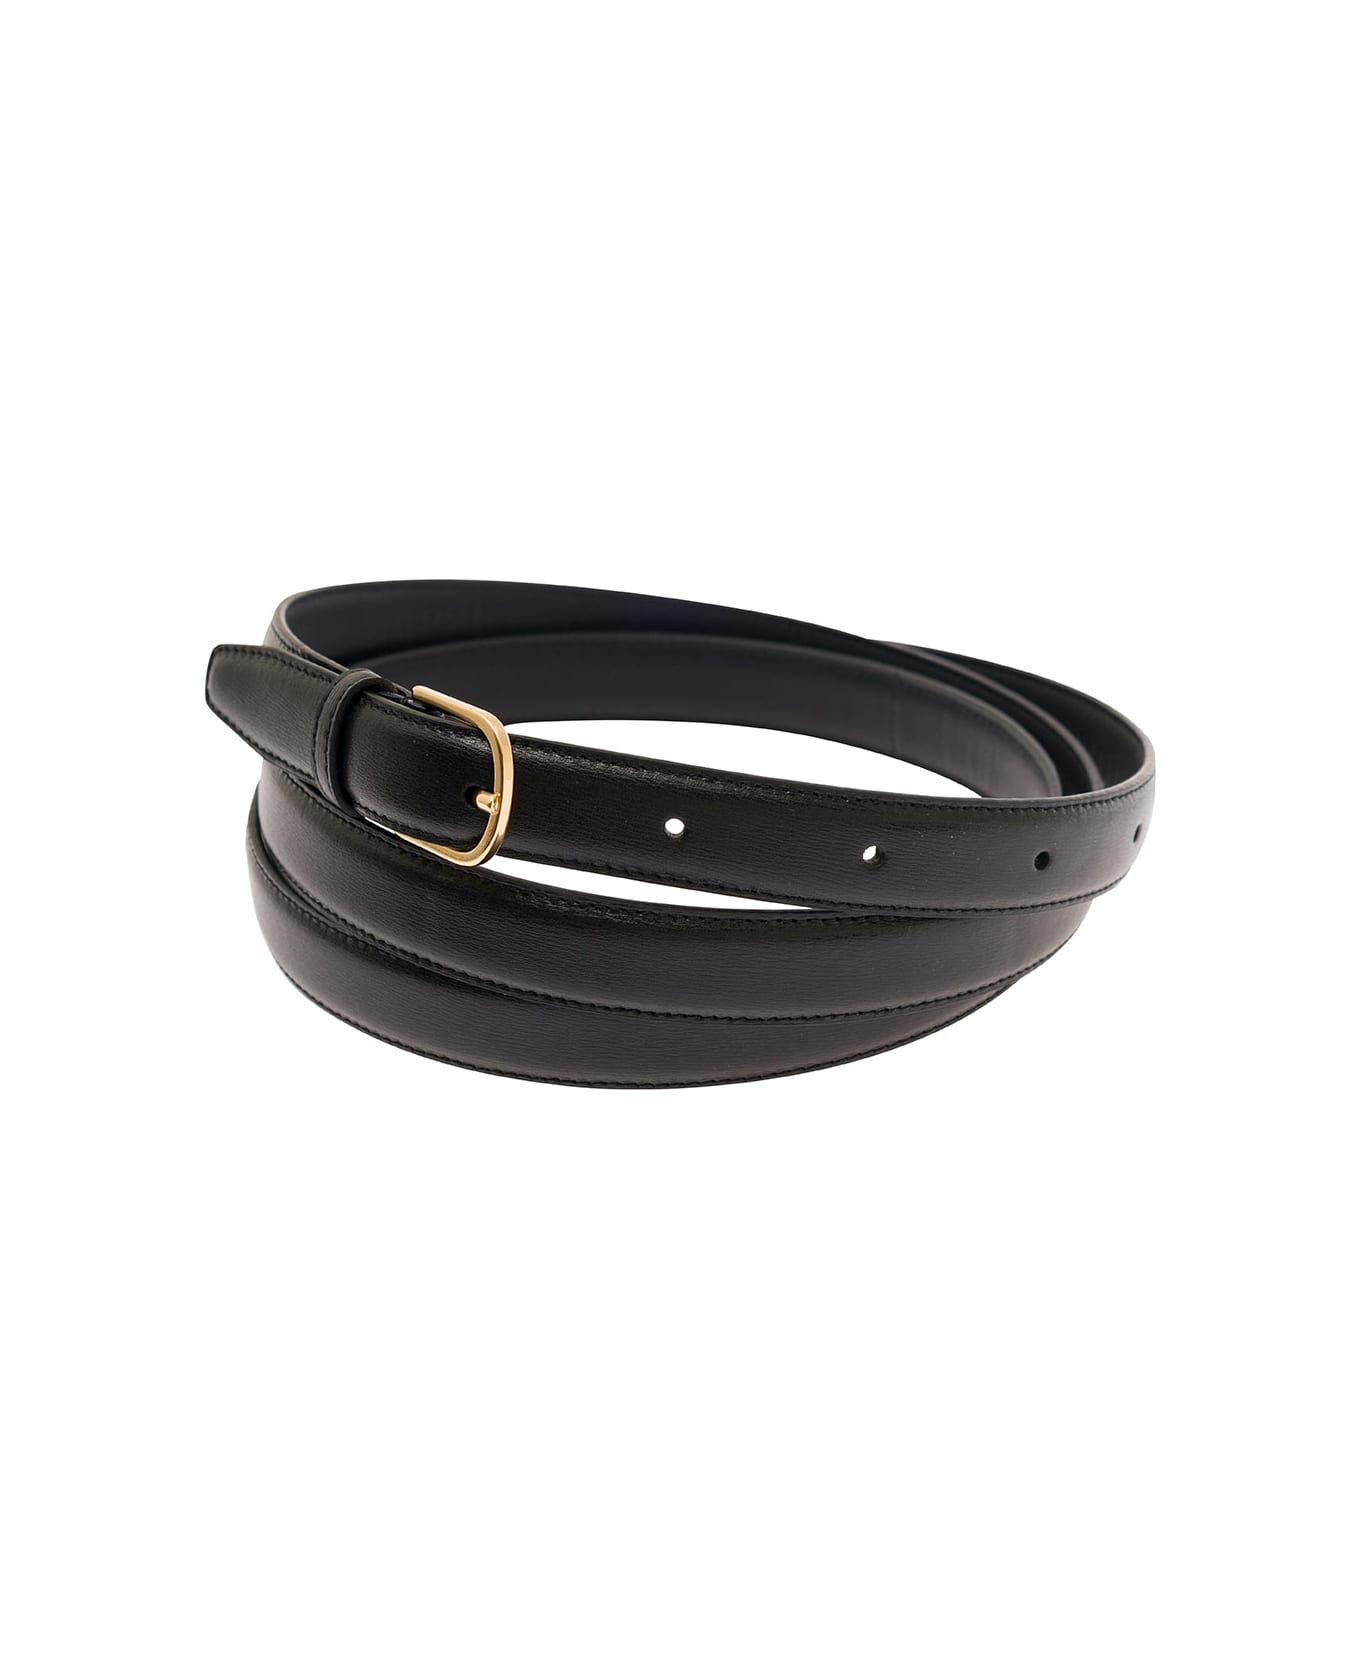 Totême Black Wrap Belt With Gold Tone Buckle In Leather Woman - Black